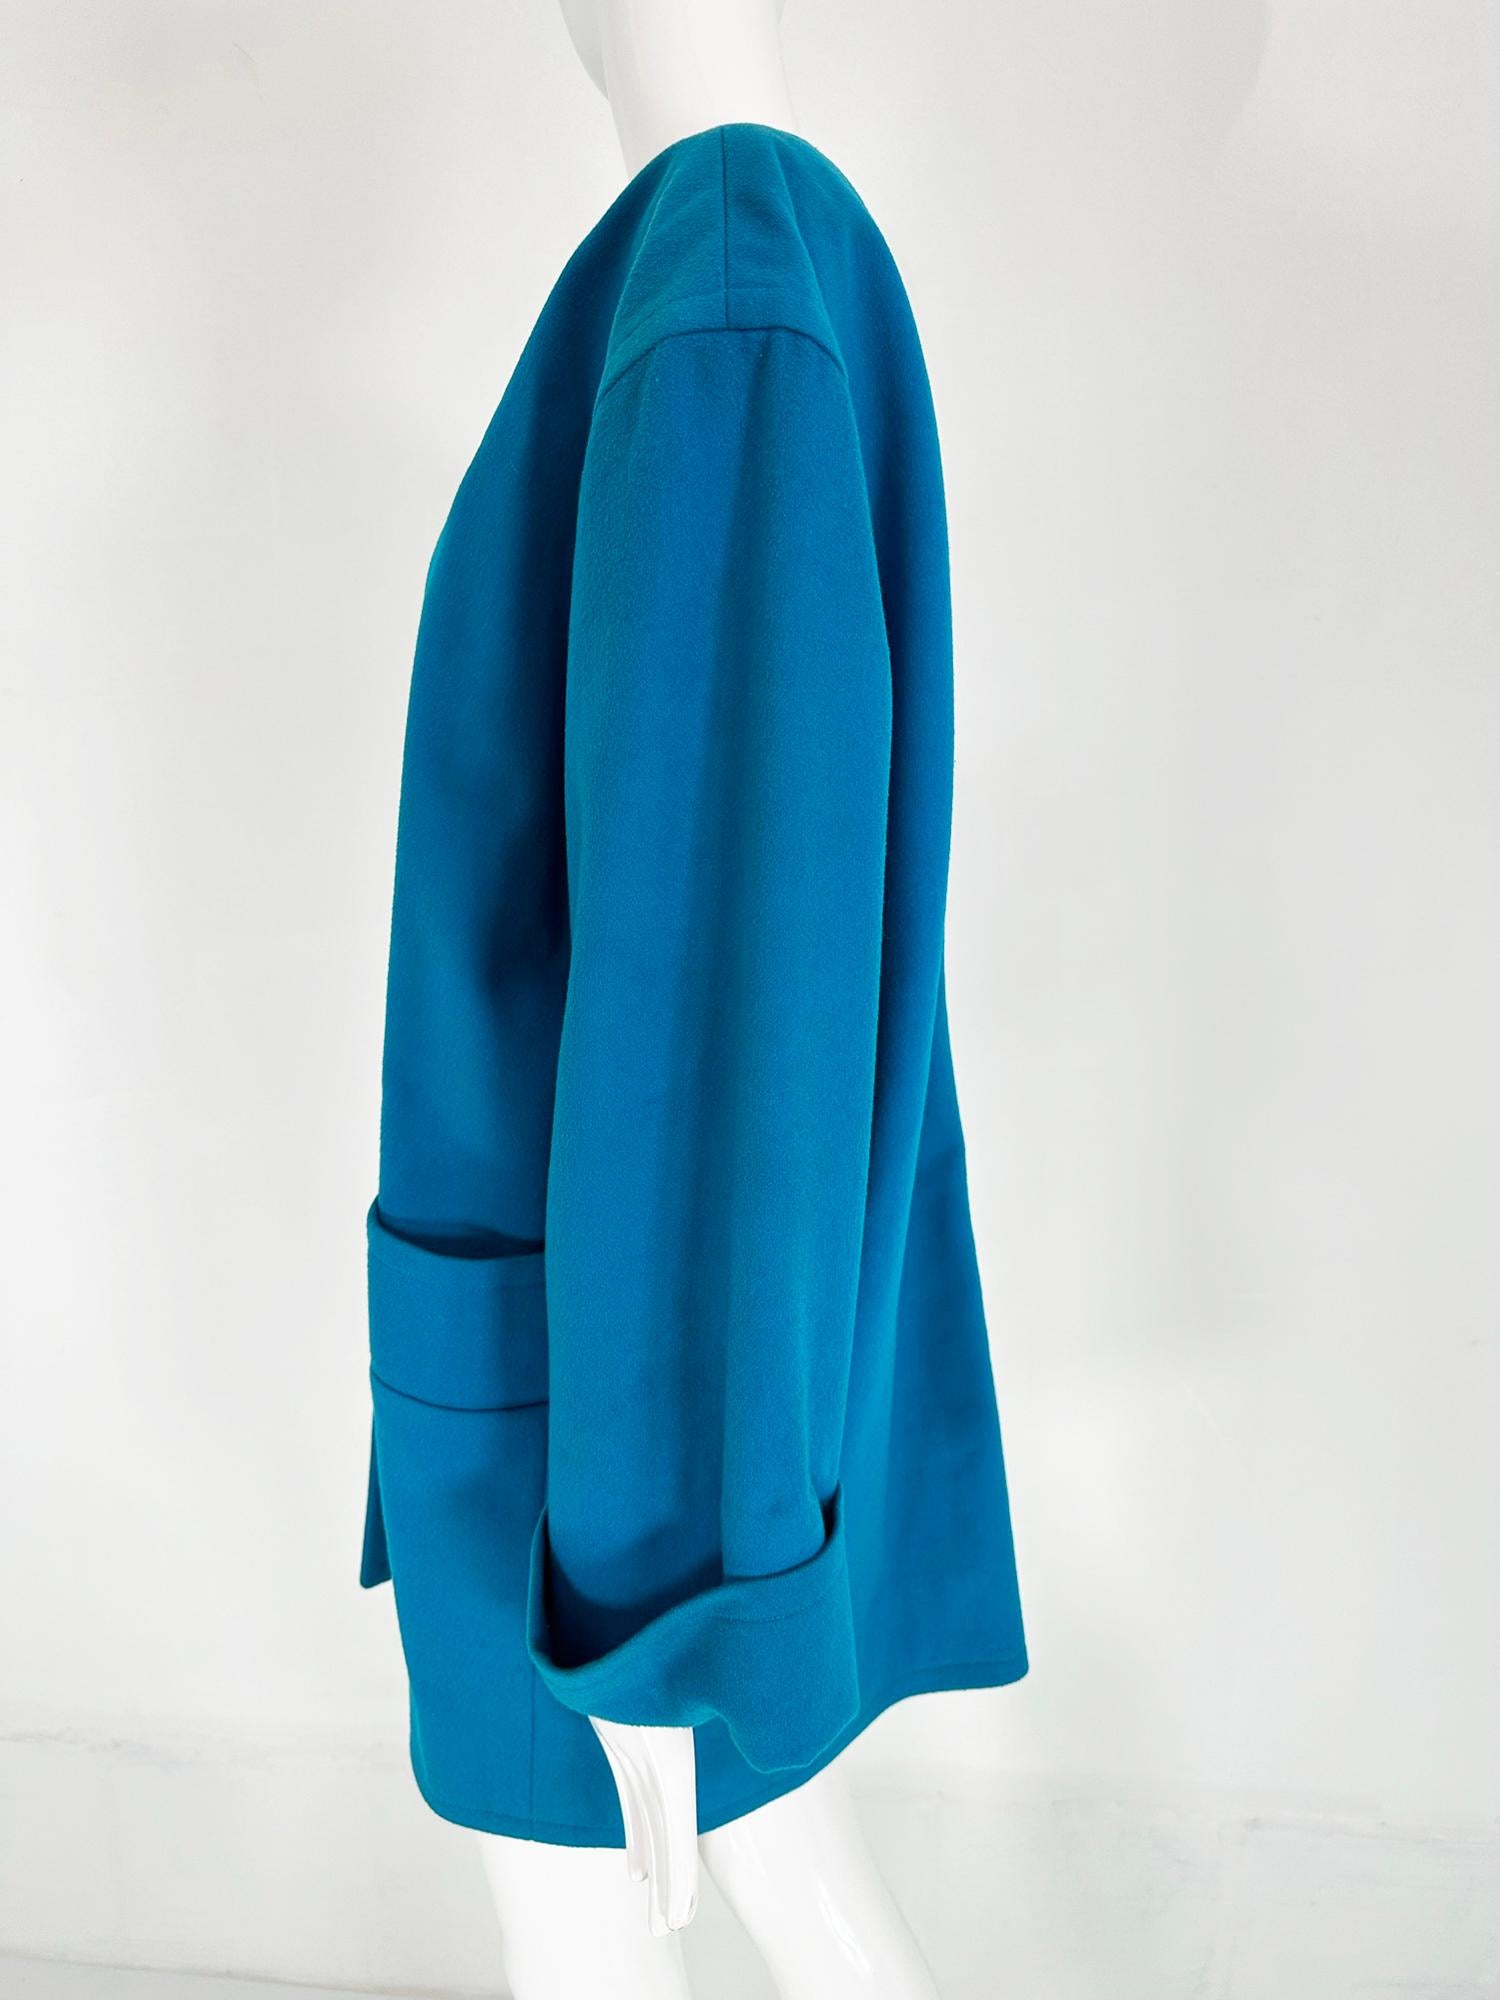 Givenchy Turquoise Wool Open Front Swing Coat with Angled Pockets 1980s For Sale 2